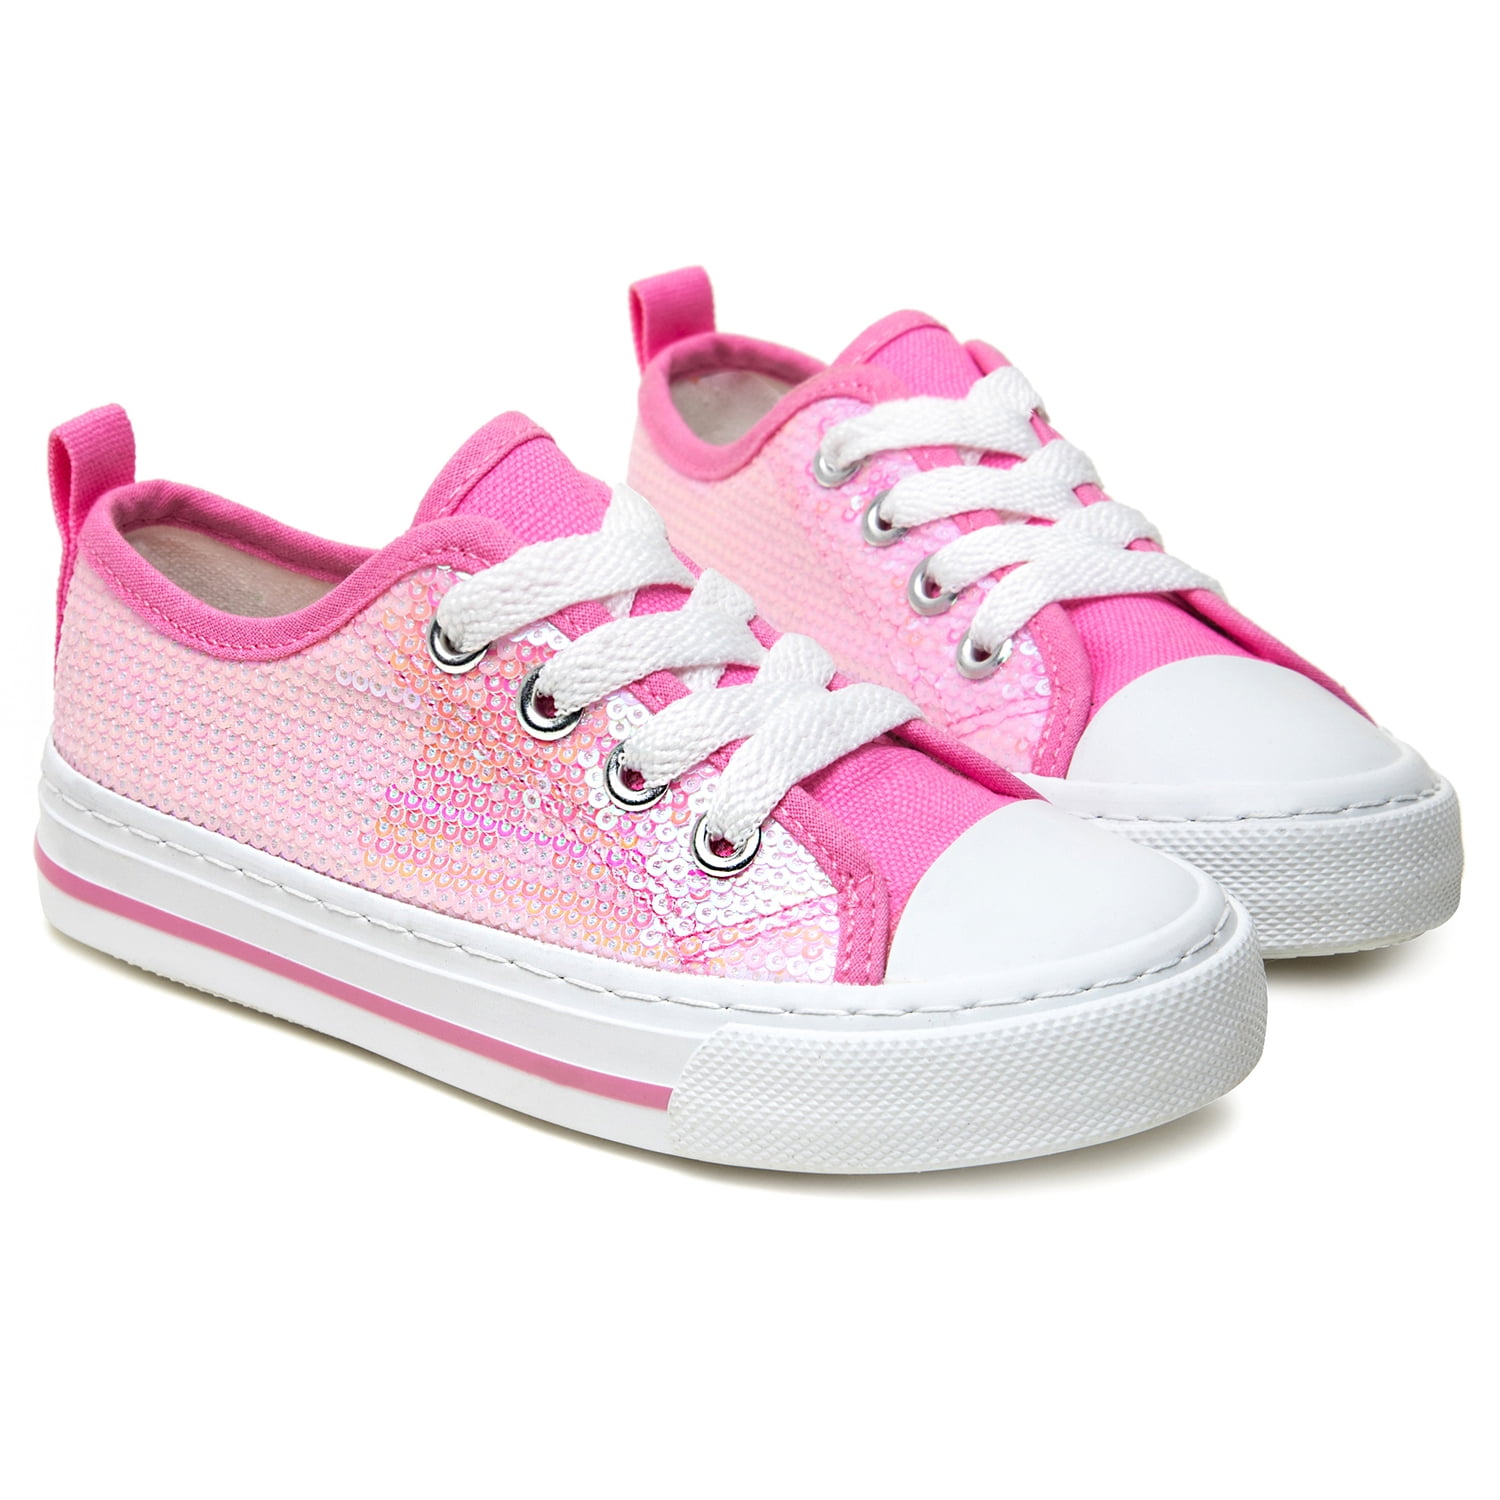 Girls Kids Sneakers Glitter Sequins Canvas Shoes Toddler Child Sparkle ...